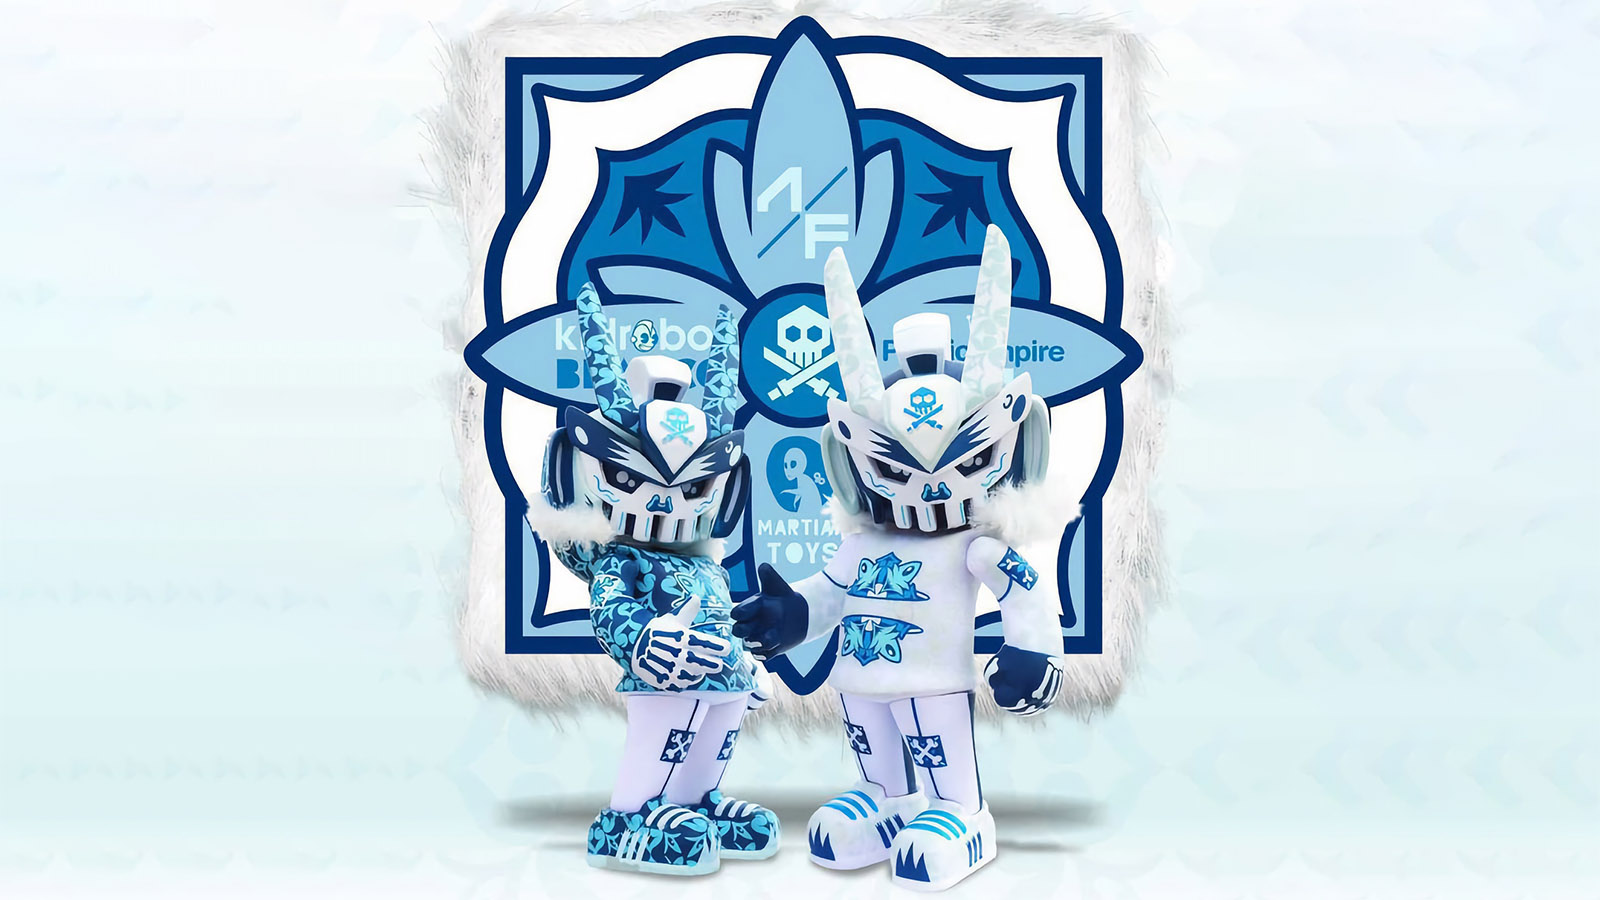 You are currently viewing T6Q FU3L Blizzard – Branco & Azul by Add Gas x Martian Toys